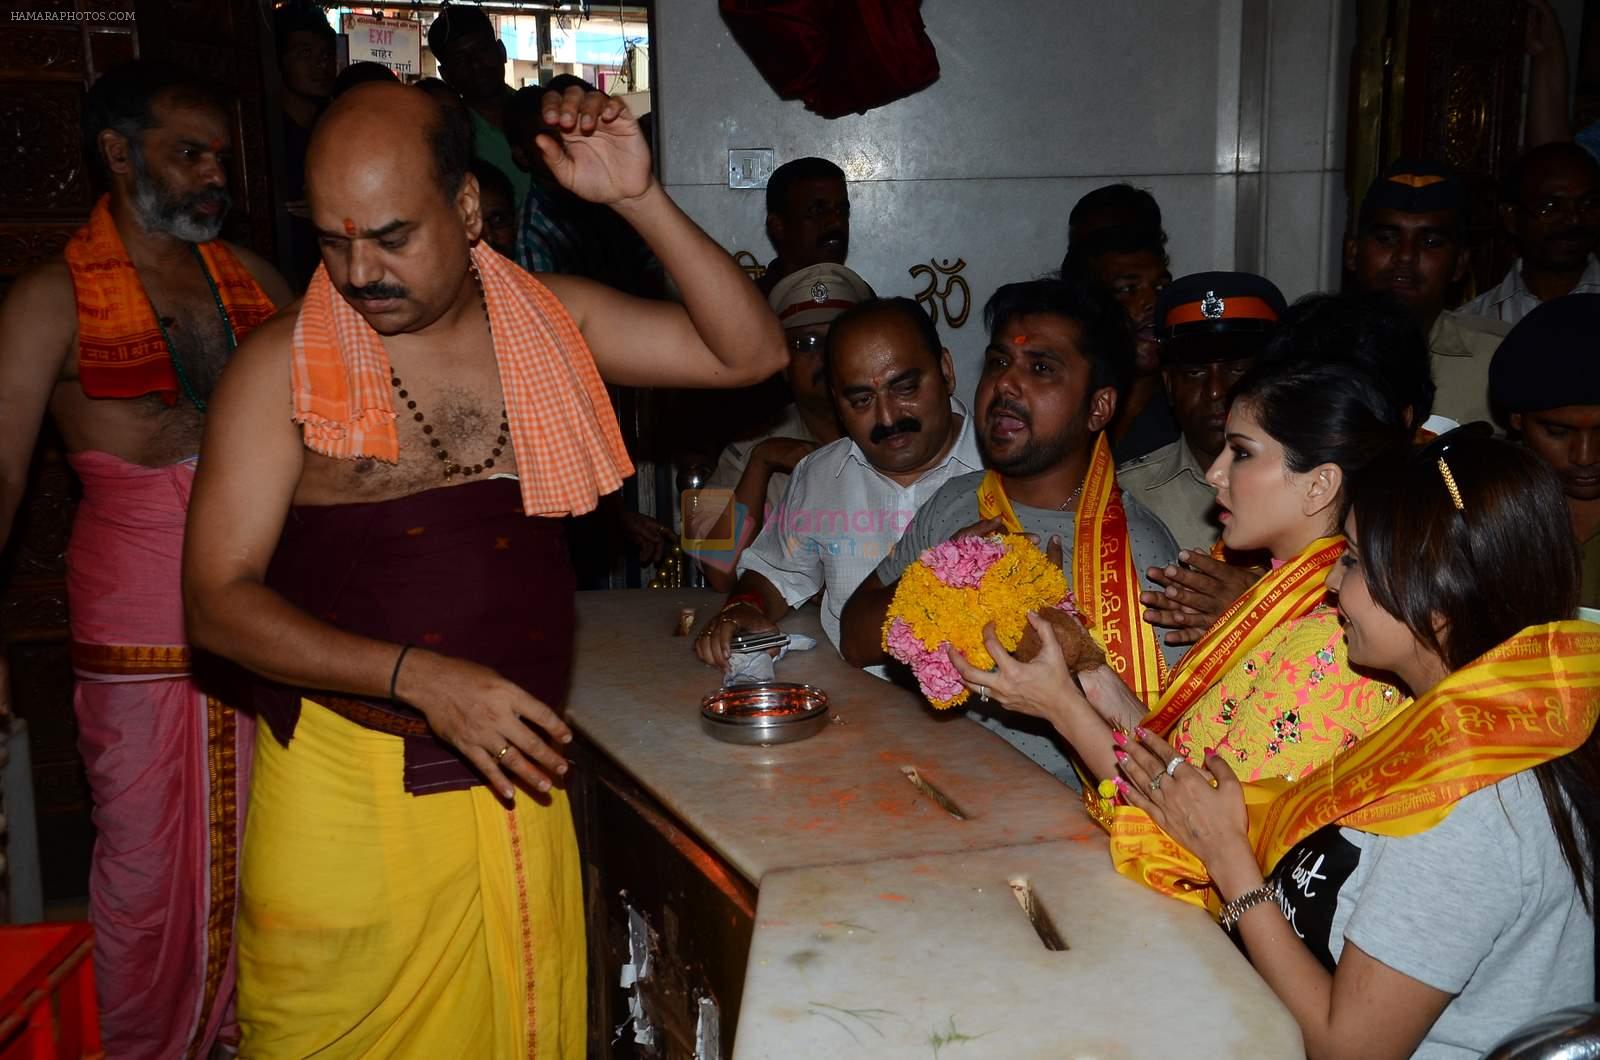 Sunny leone visits Siddhivinayak Temple on 1st May 2015